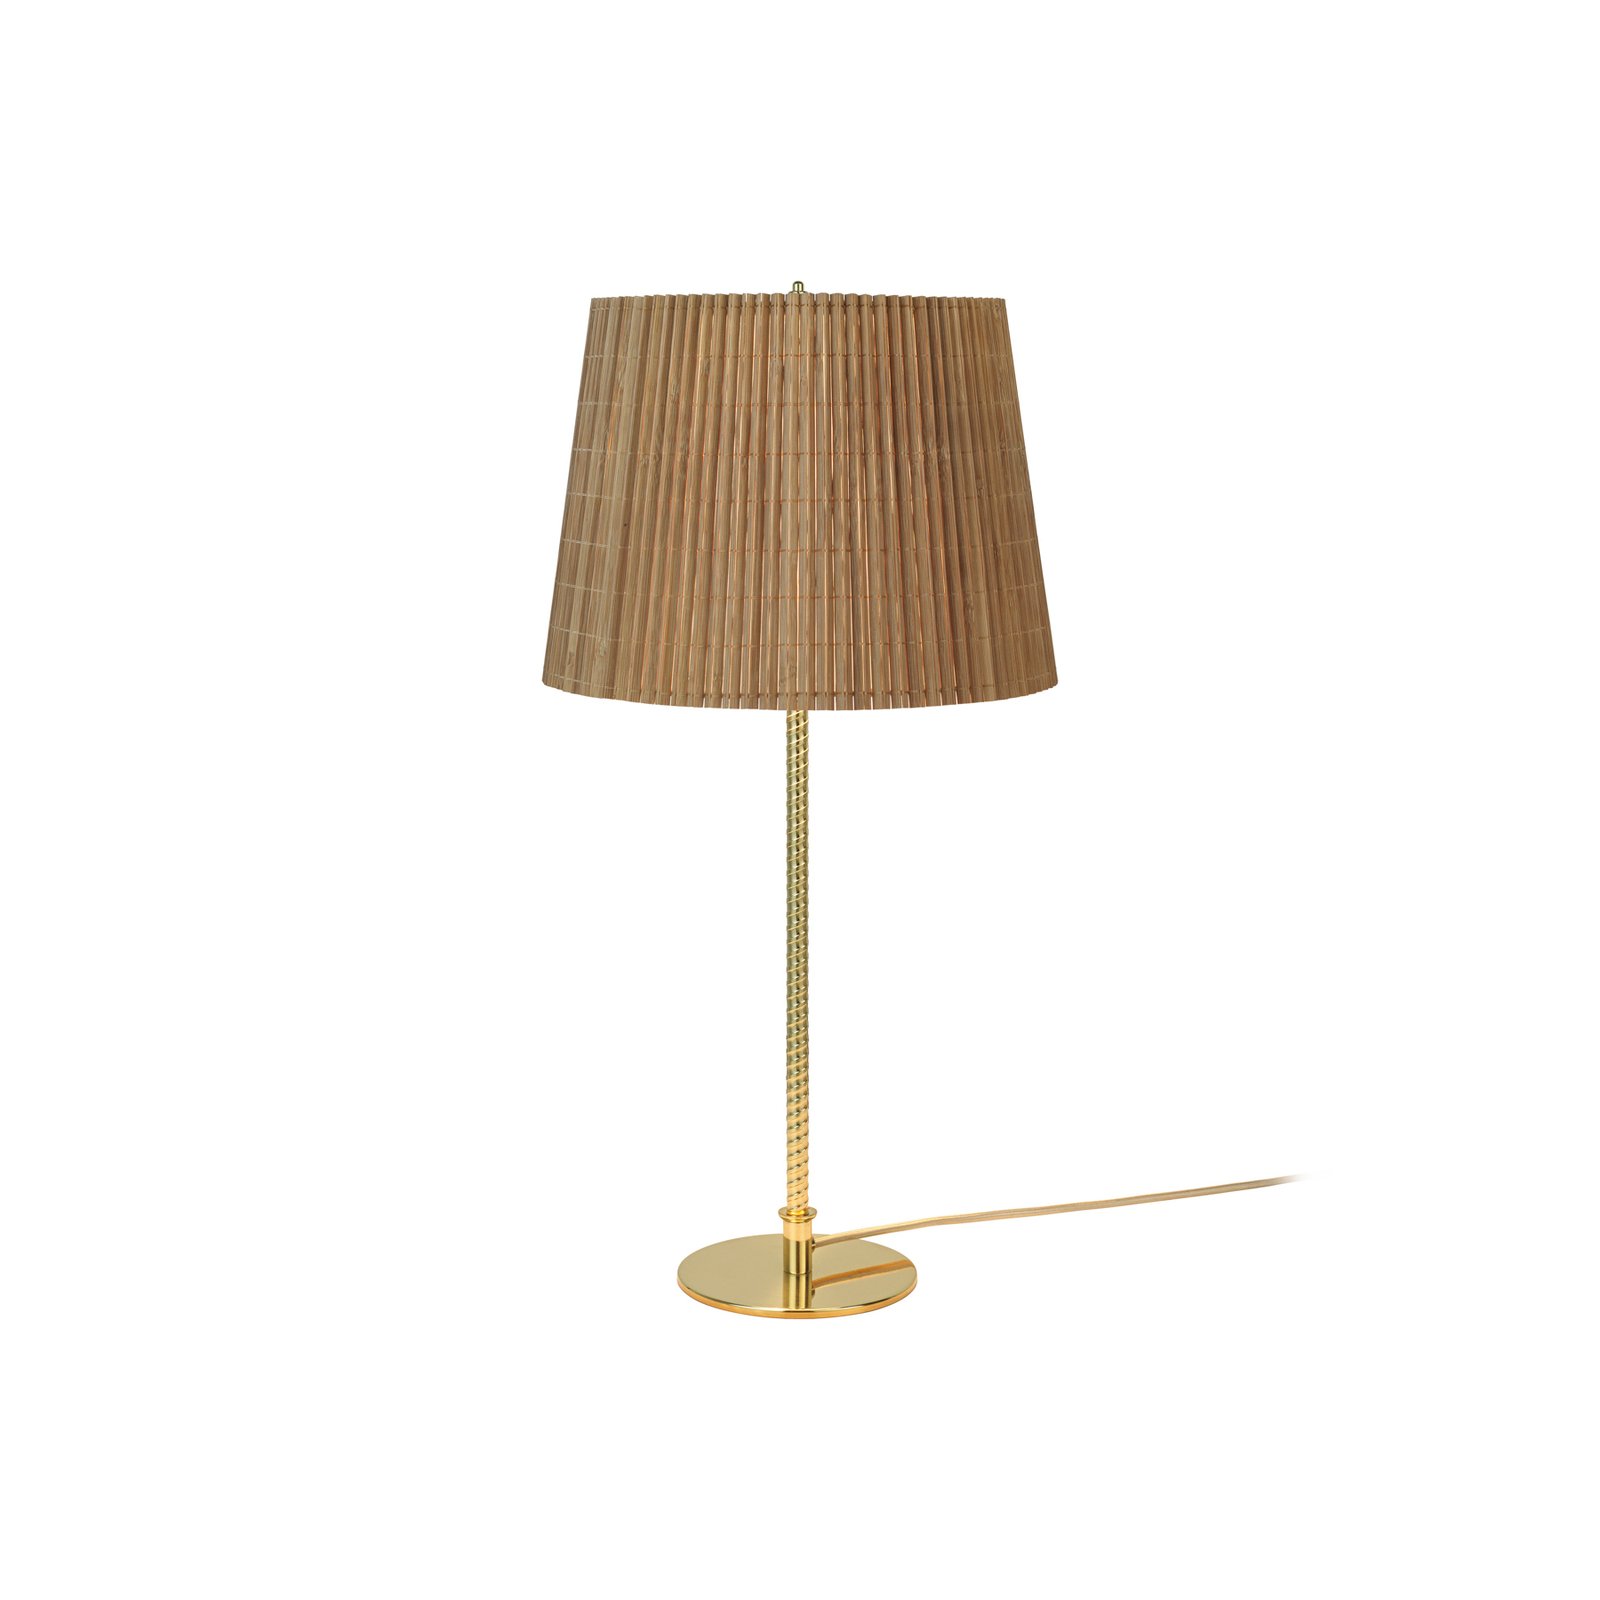 GUBI table lamp 9205, brass, bamboo lampshade, height 58 cm